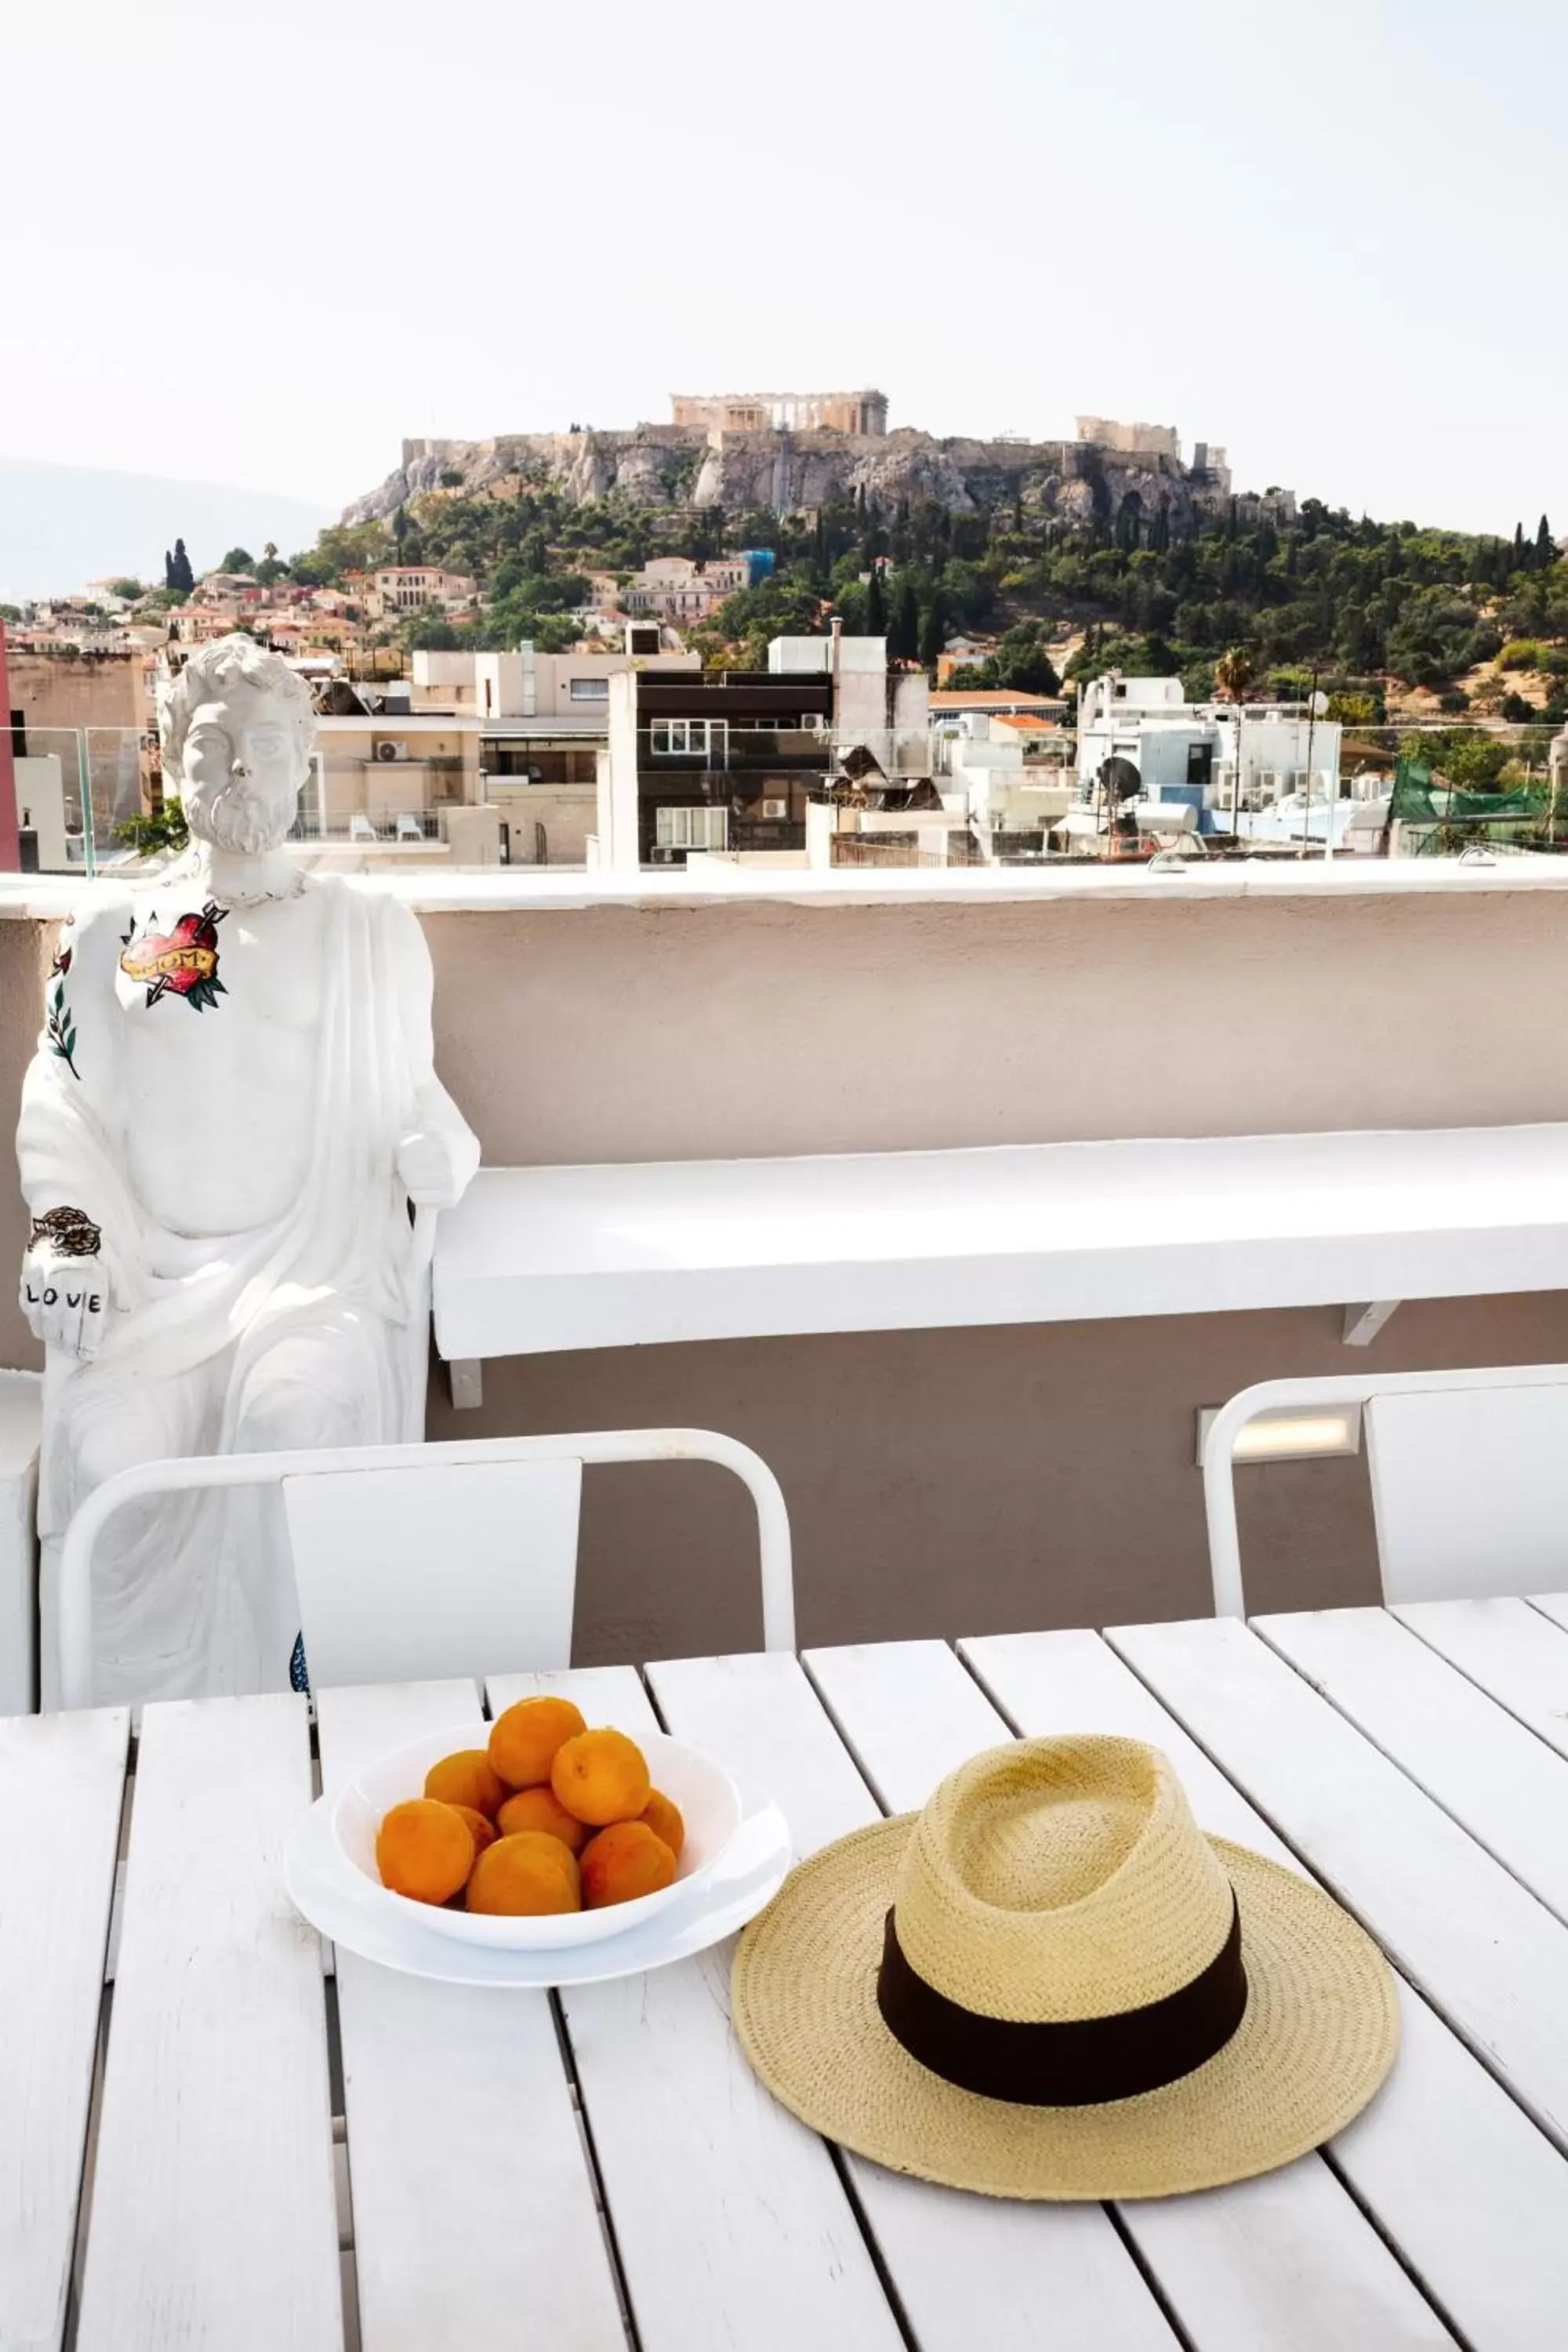 Balcony/Terrace in Downtown Athens Lofts - The Acropolis Observatory